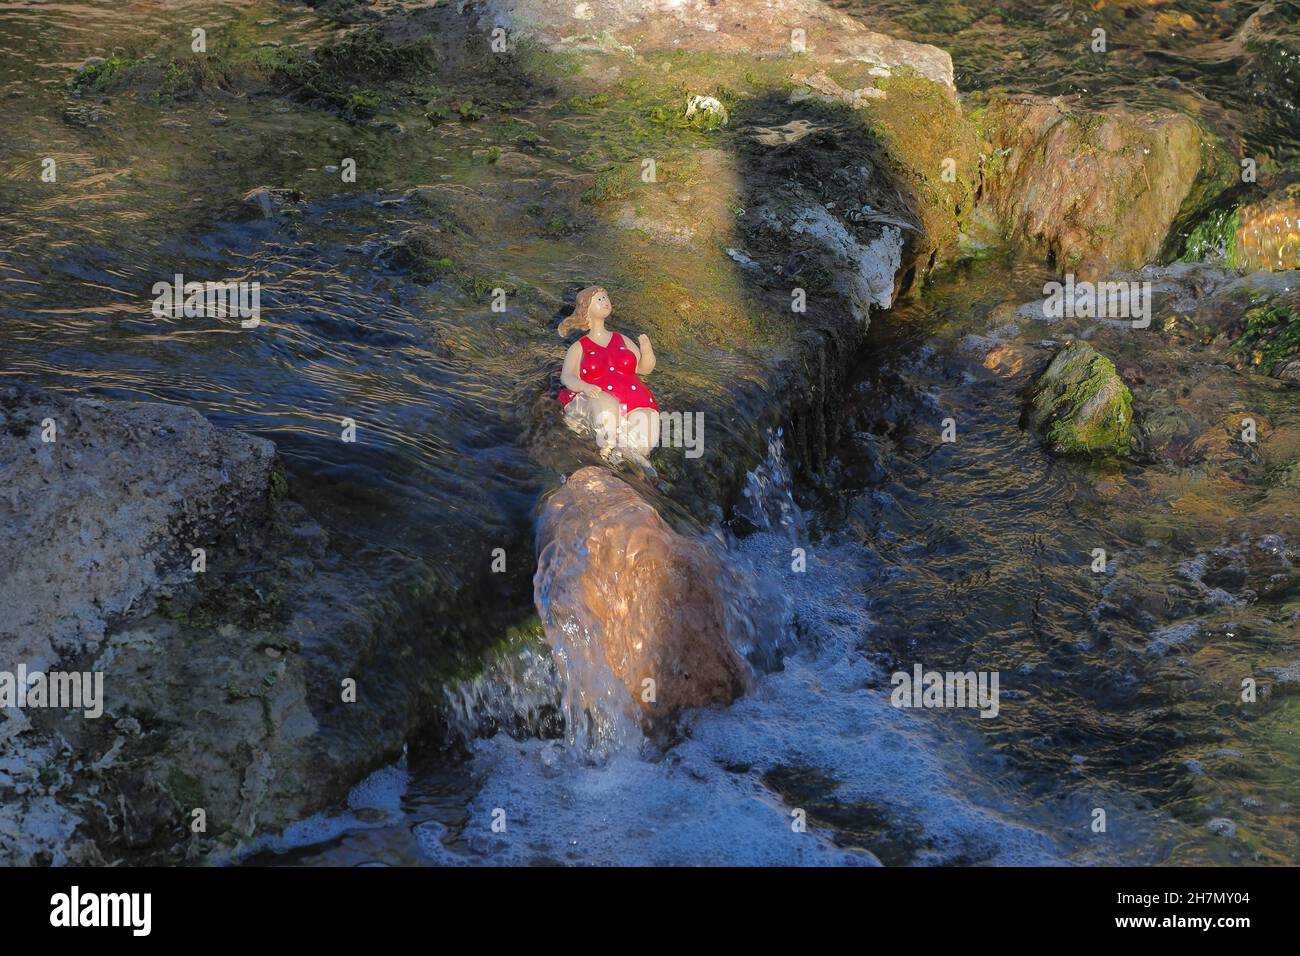 Bathers by the waterfall, figure by the waterfall, buxom stone figure by the water, sitting woman sculpture in red swimming costume by the water Stock Photo